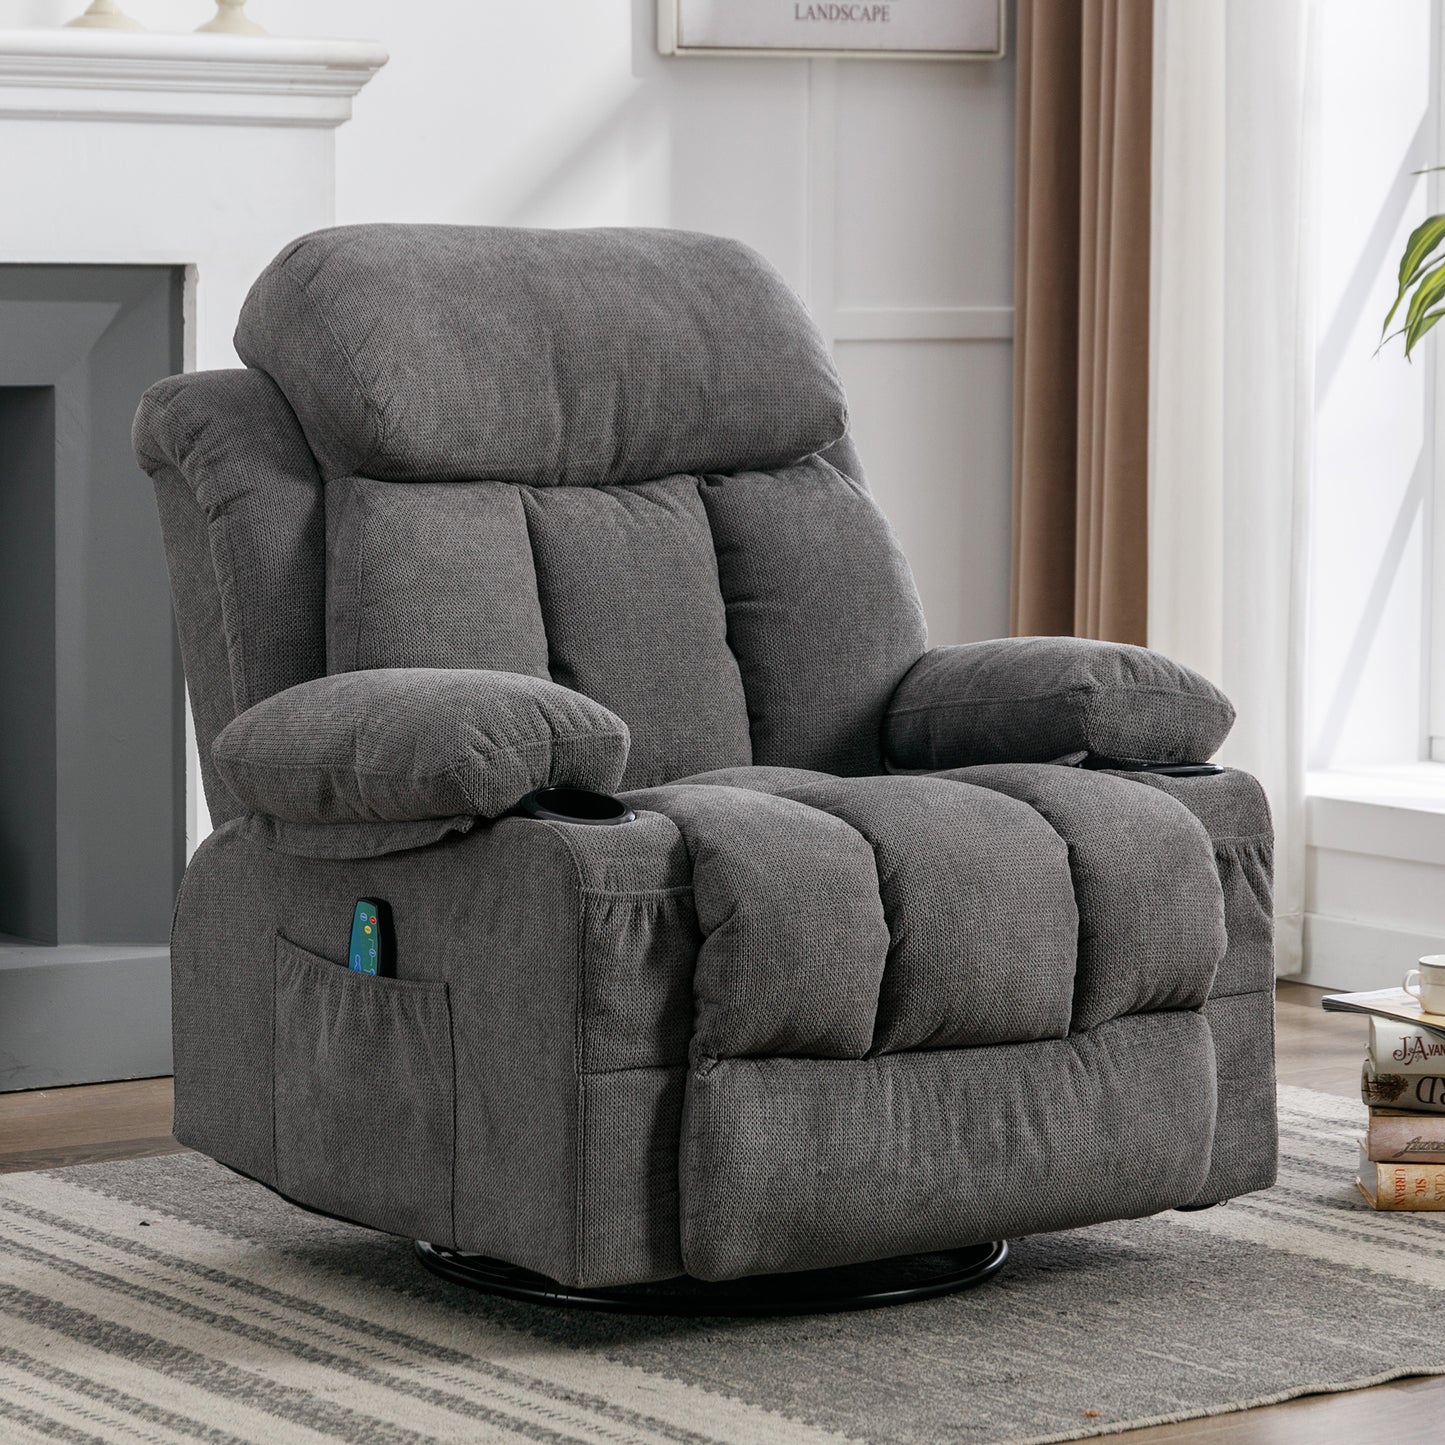 SYNGAR Recliner Sofa Chair with Heat and Massage Function, Manual Recliner Chair with USB and 2 Cup Holders, Velvet Rocker Single Sofa, Swivel Glider Chair for Nursery Bedroom Home Theater, Gray